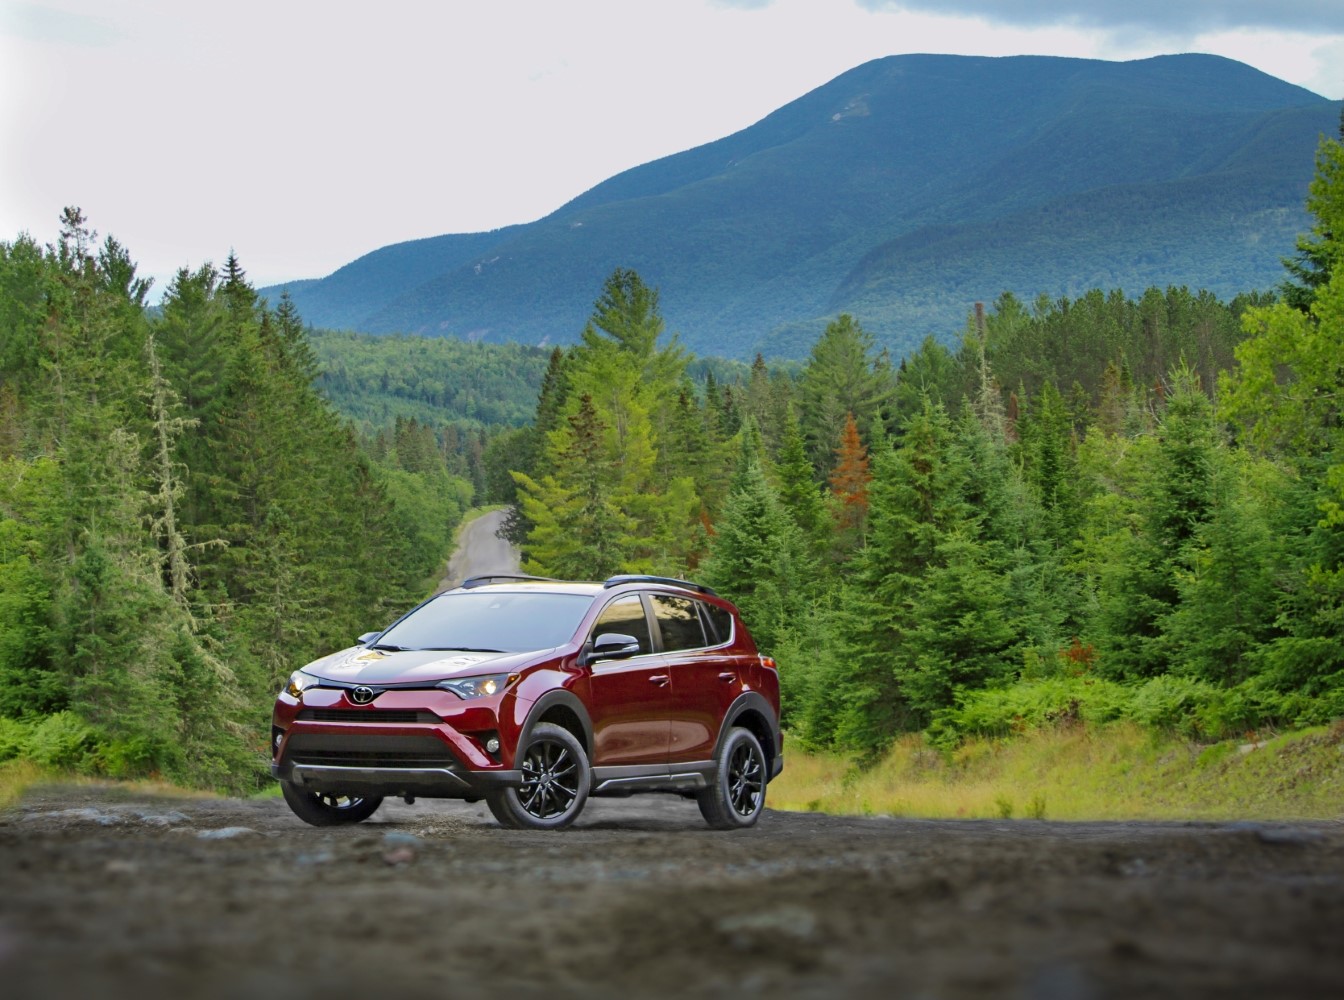 2018 Toyota RAV4 SUV Specs, Review, and Pricing  CarSession